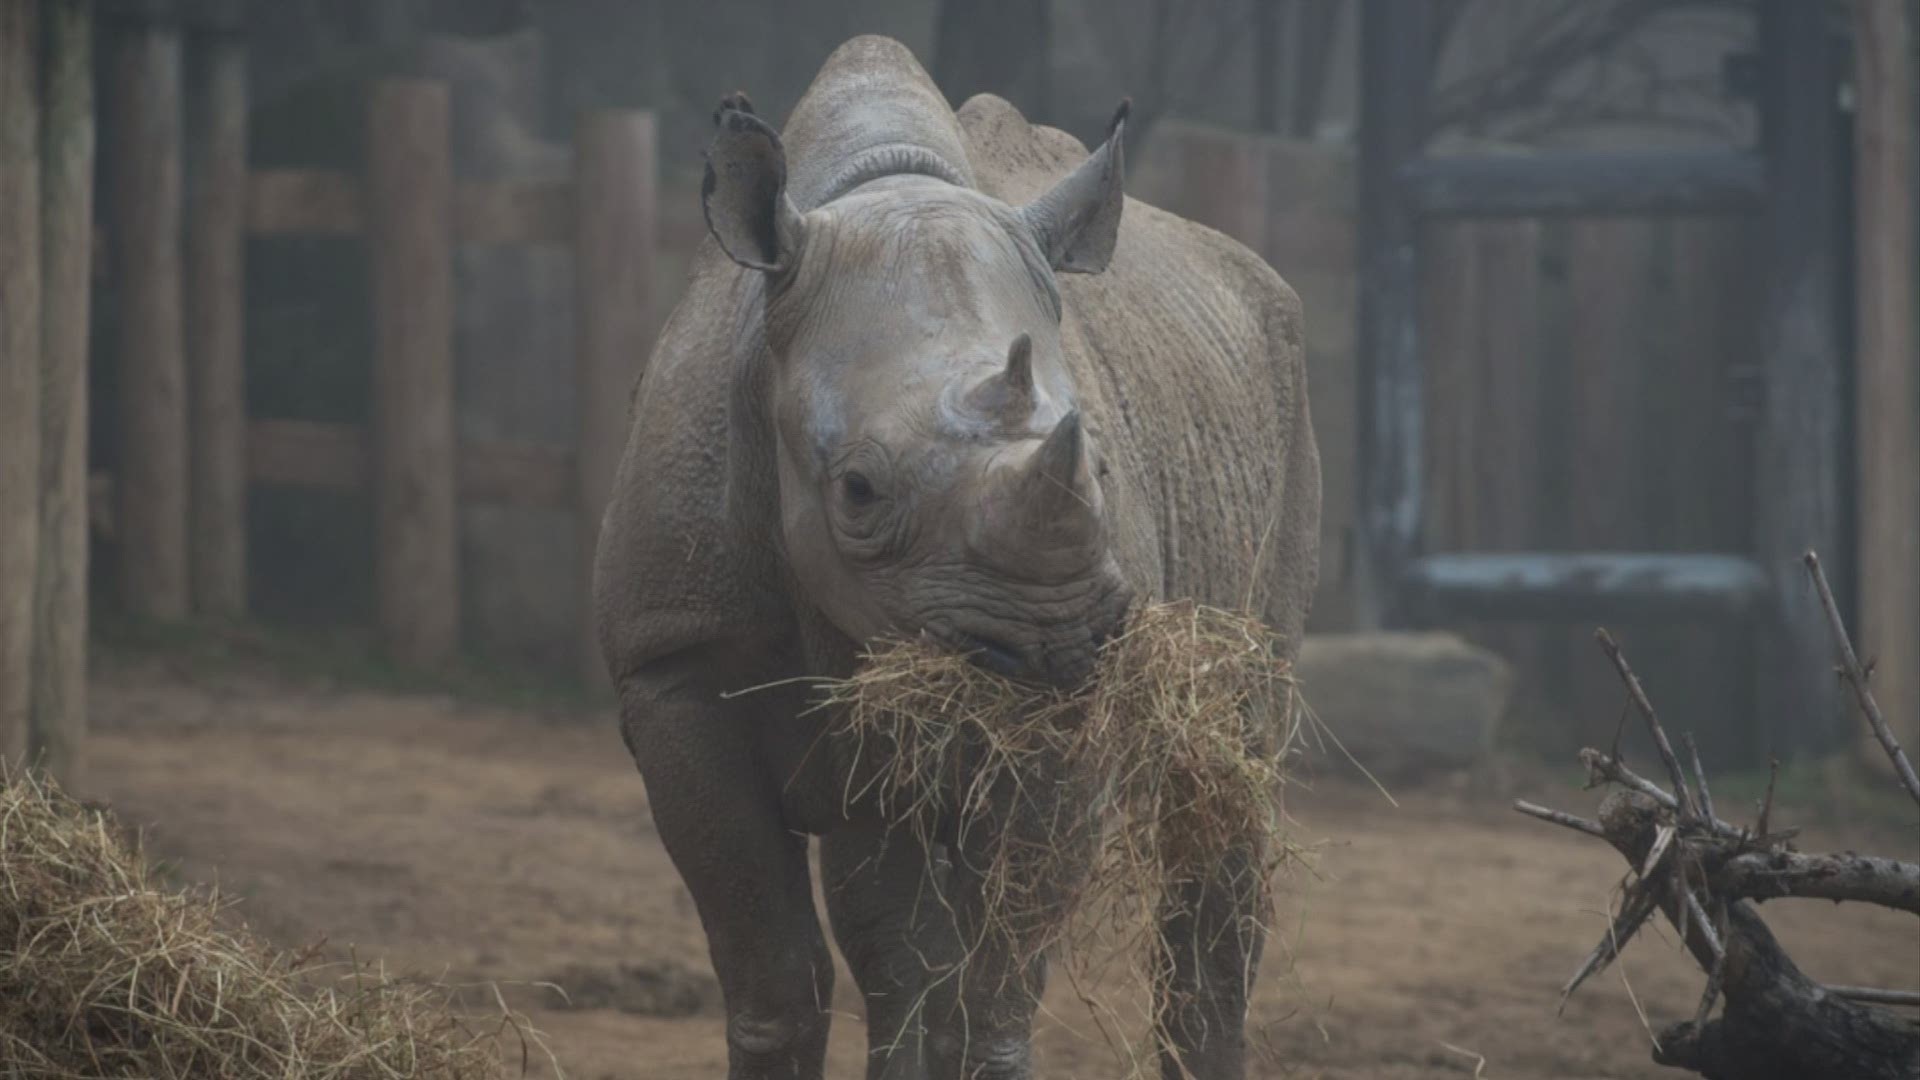 Rosie was born at the San Francisco Zoo on Jan. 6, 1990 and came to Columbus on Nov. 12, 2009.